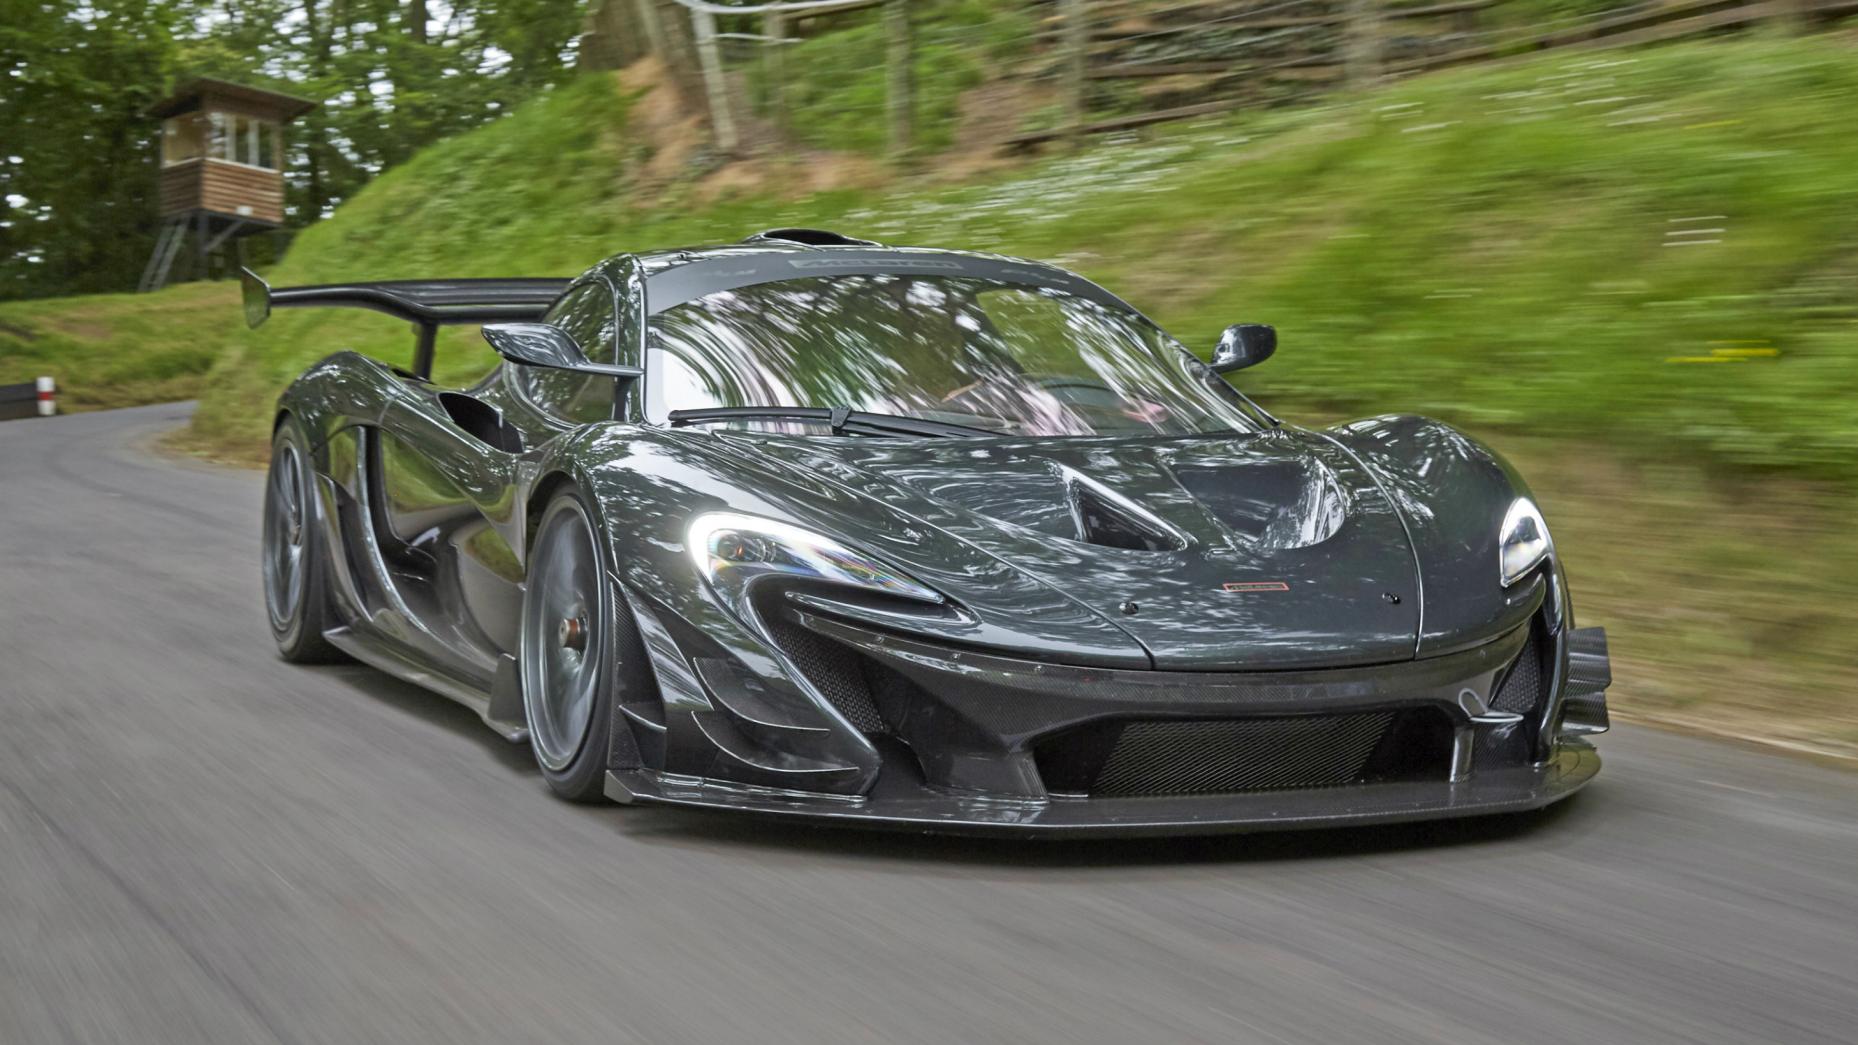 This McLaren P1 LM Could Become the Next Nurburgring 